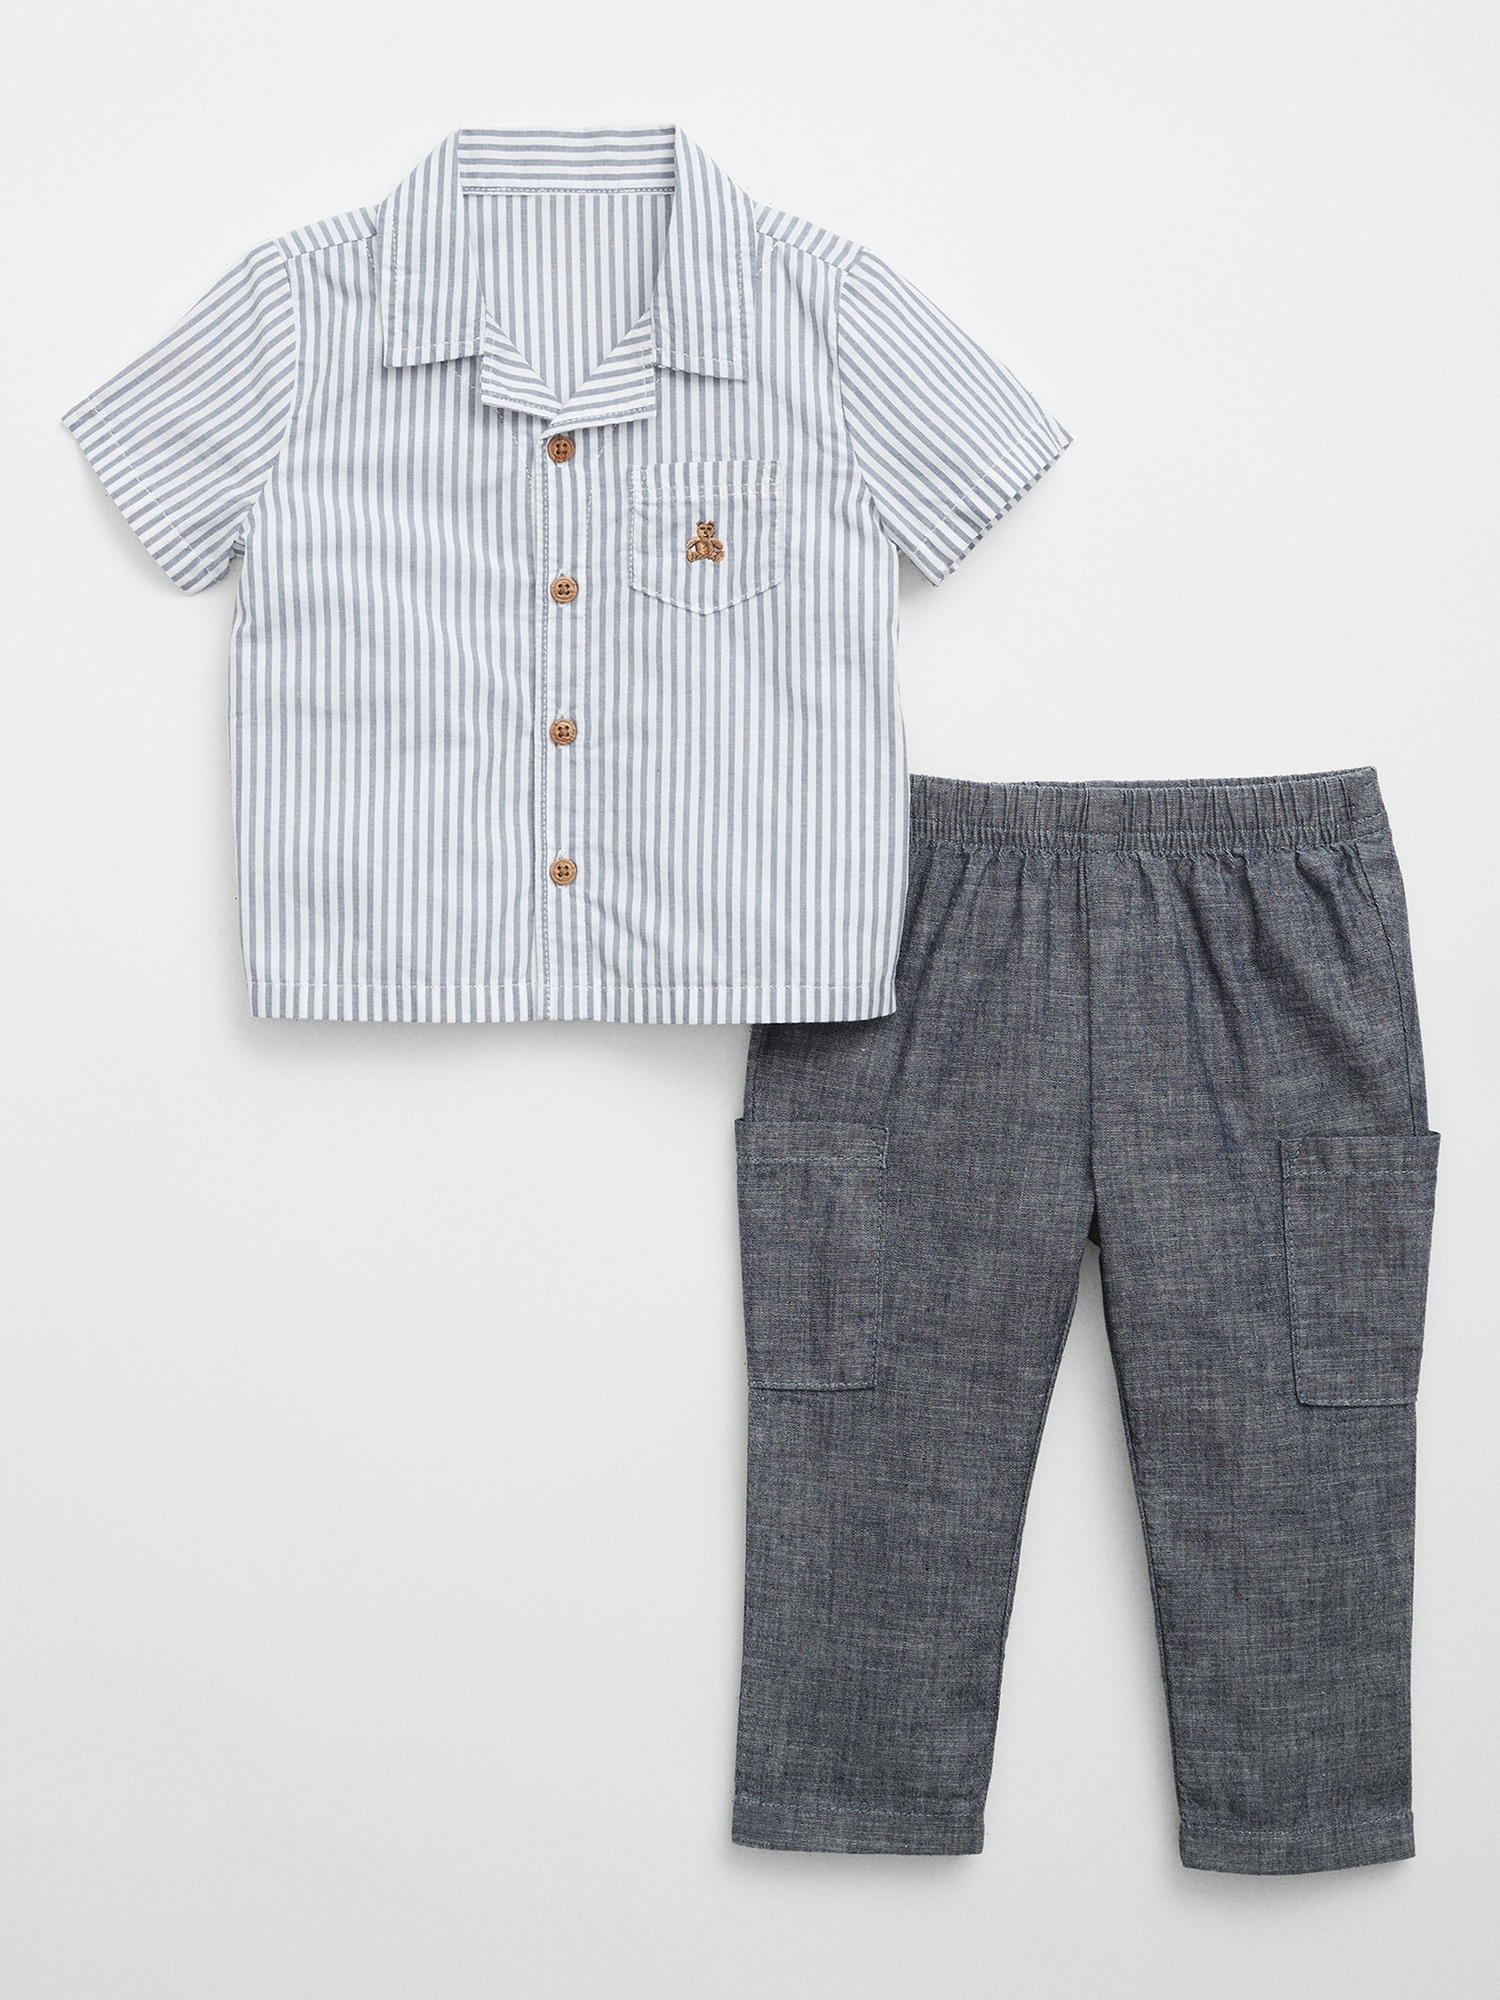 Baby Two-Piece Outfit Set